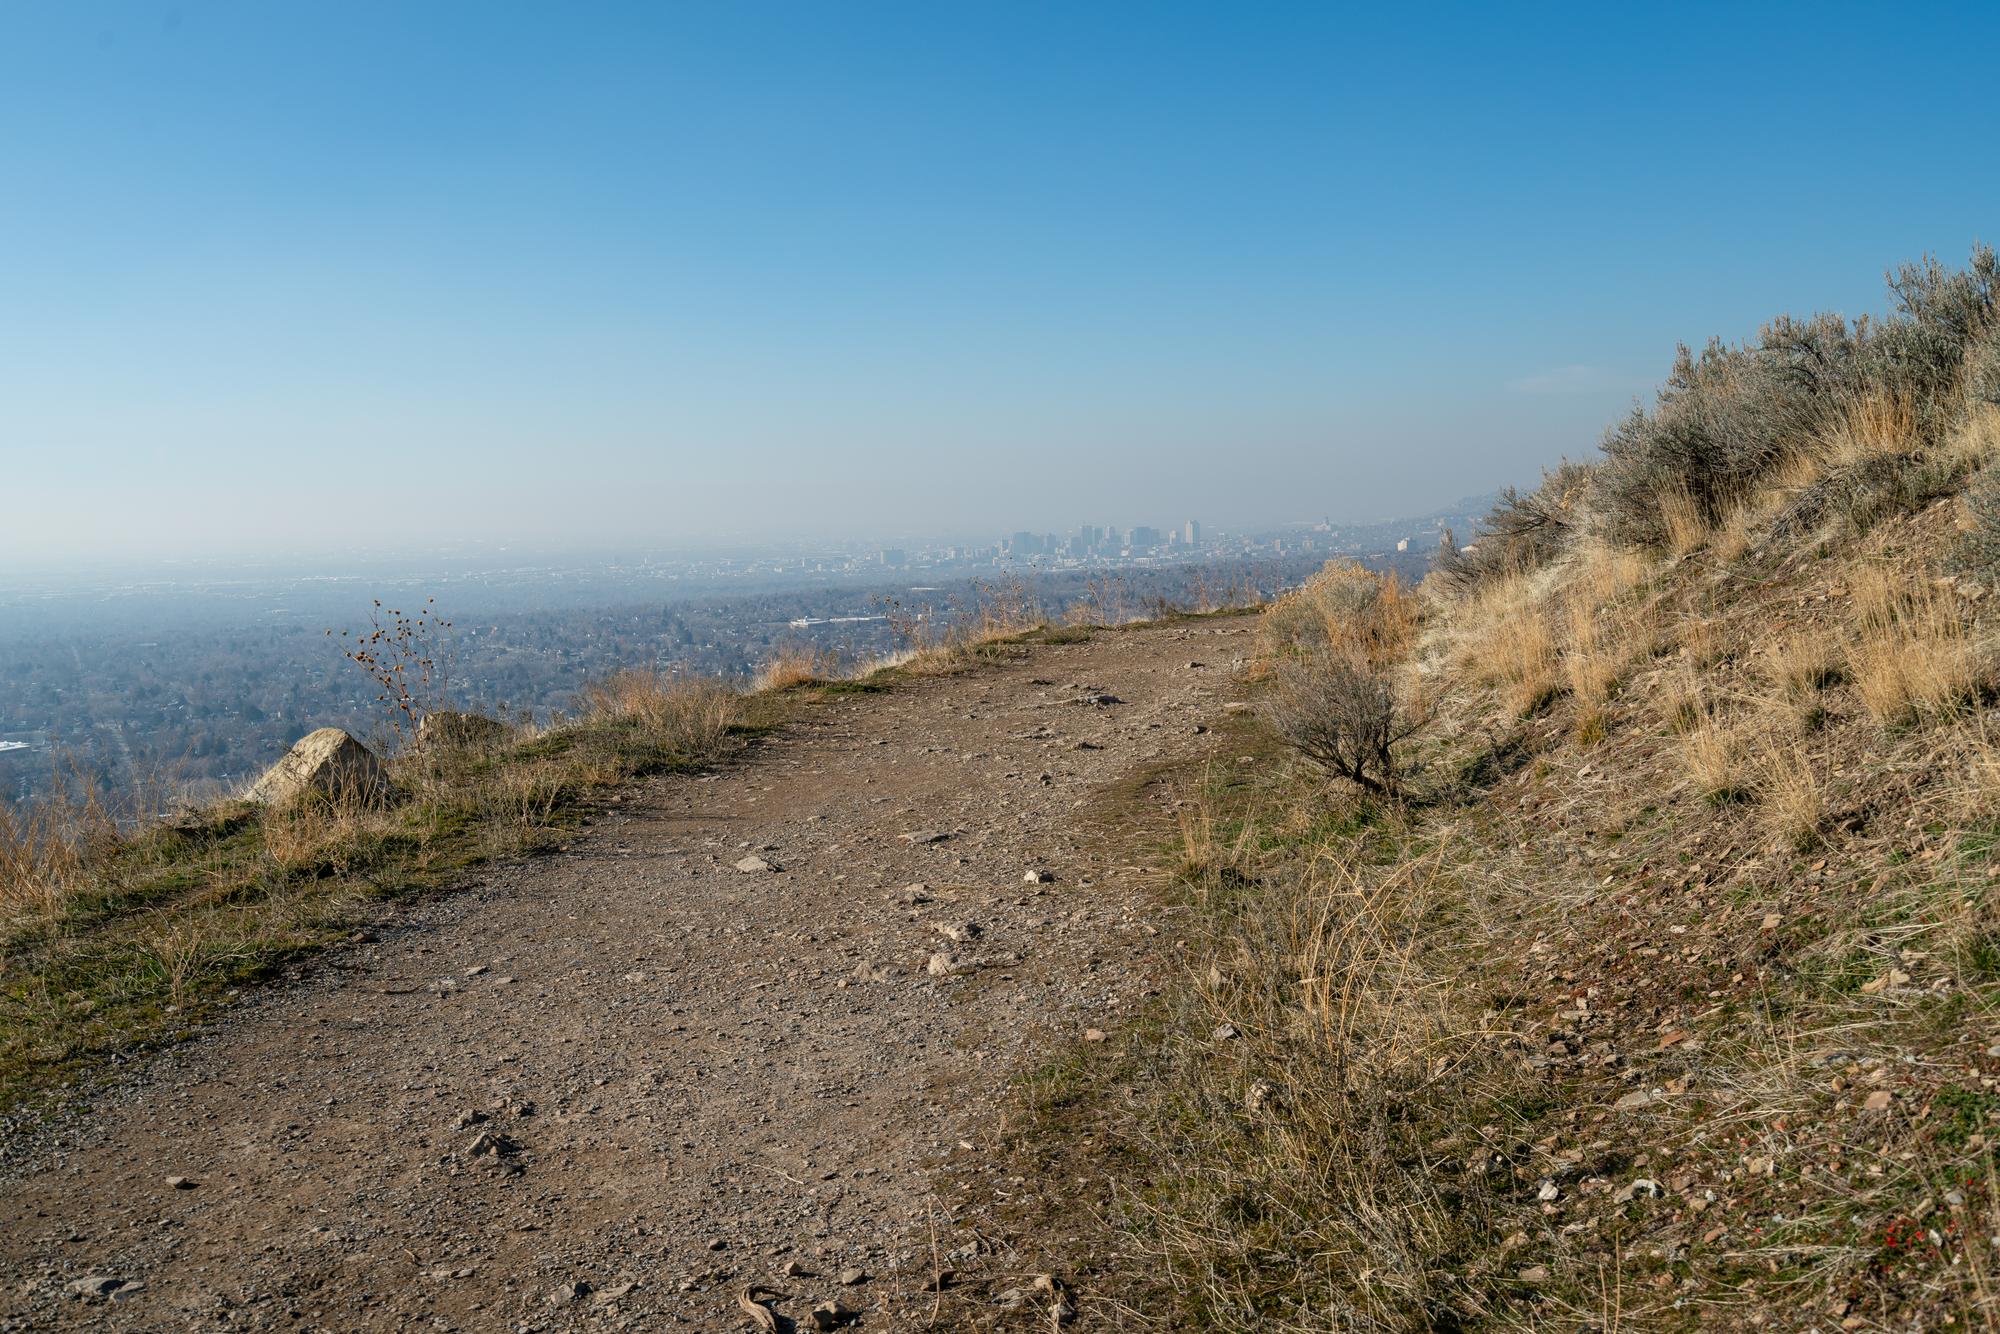 Beginning of Jack's Mountain trail with a view of Salt Lake Valley in the background.